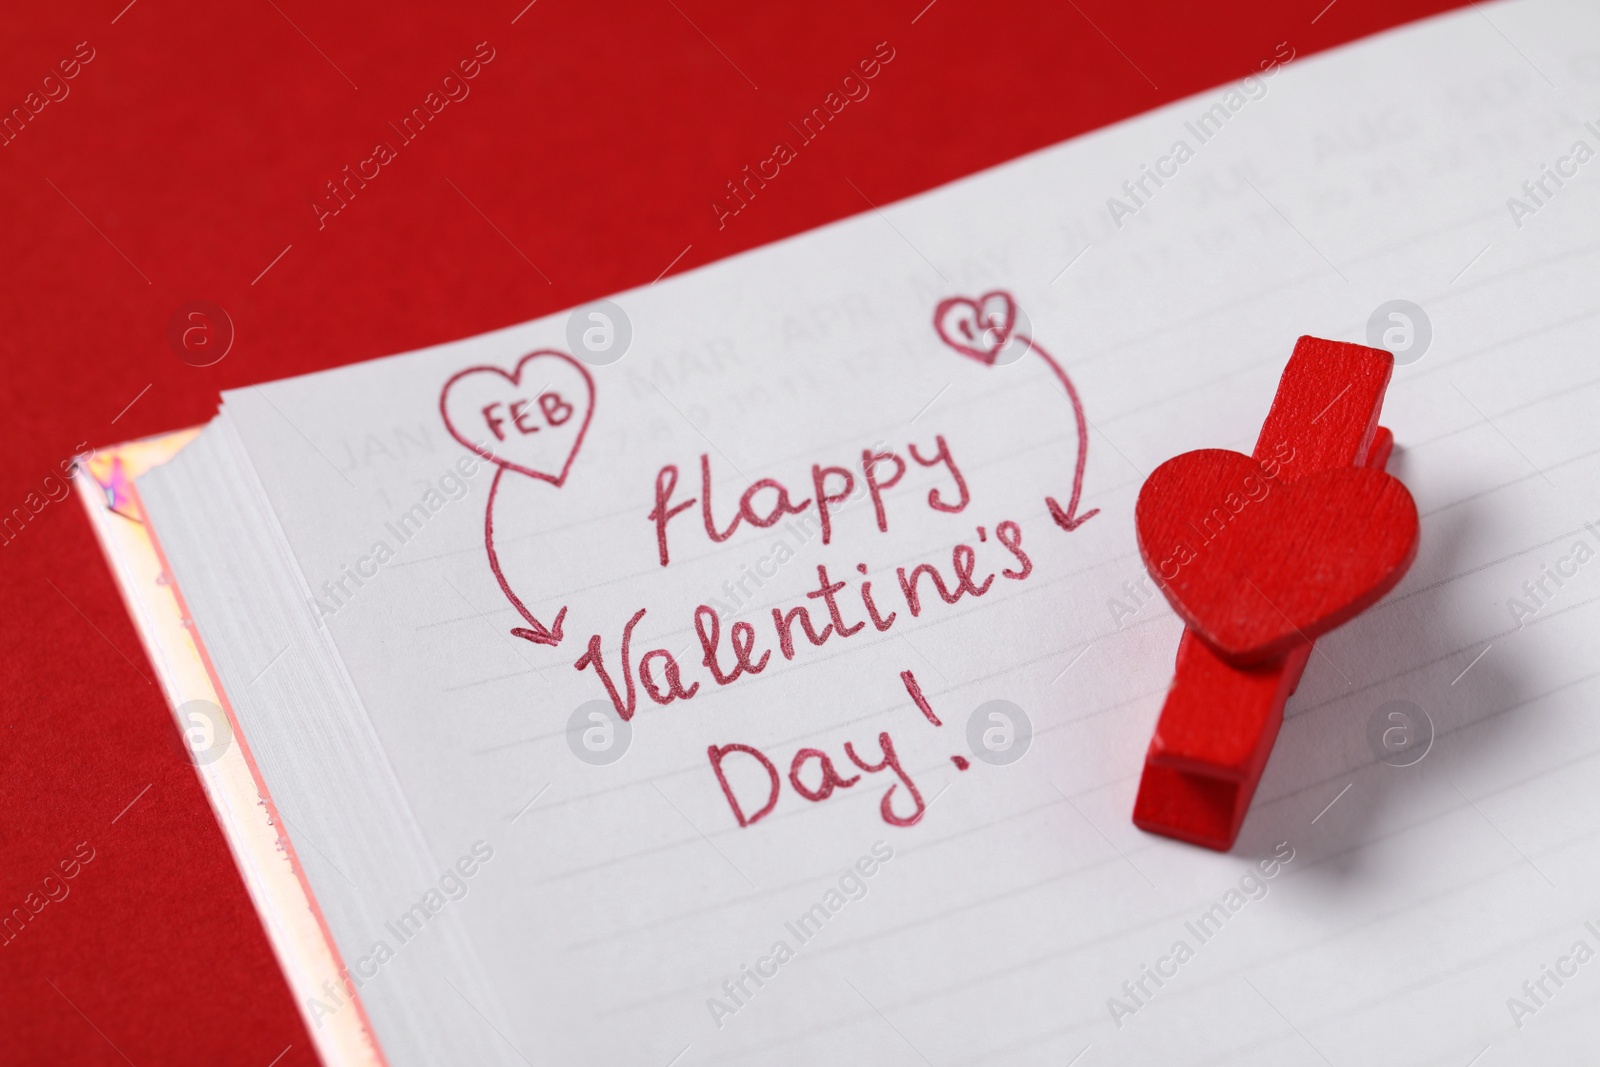 Photo of Notebook with text Happy Valentine's Day! and clothespin on red background, closeup